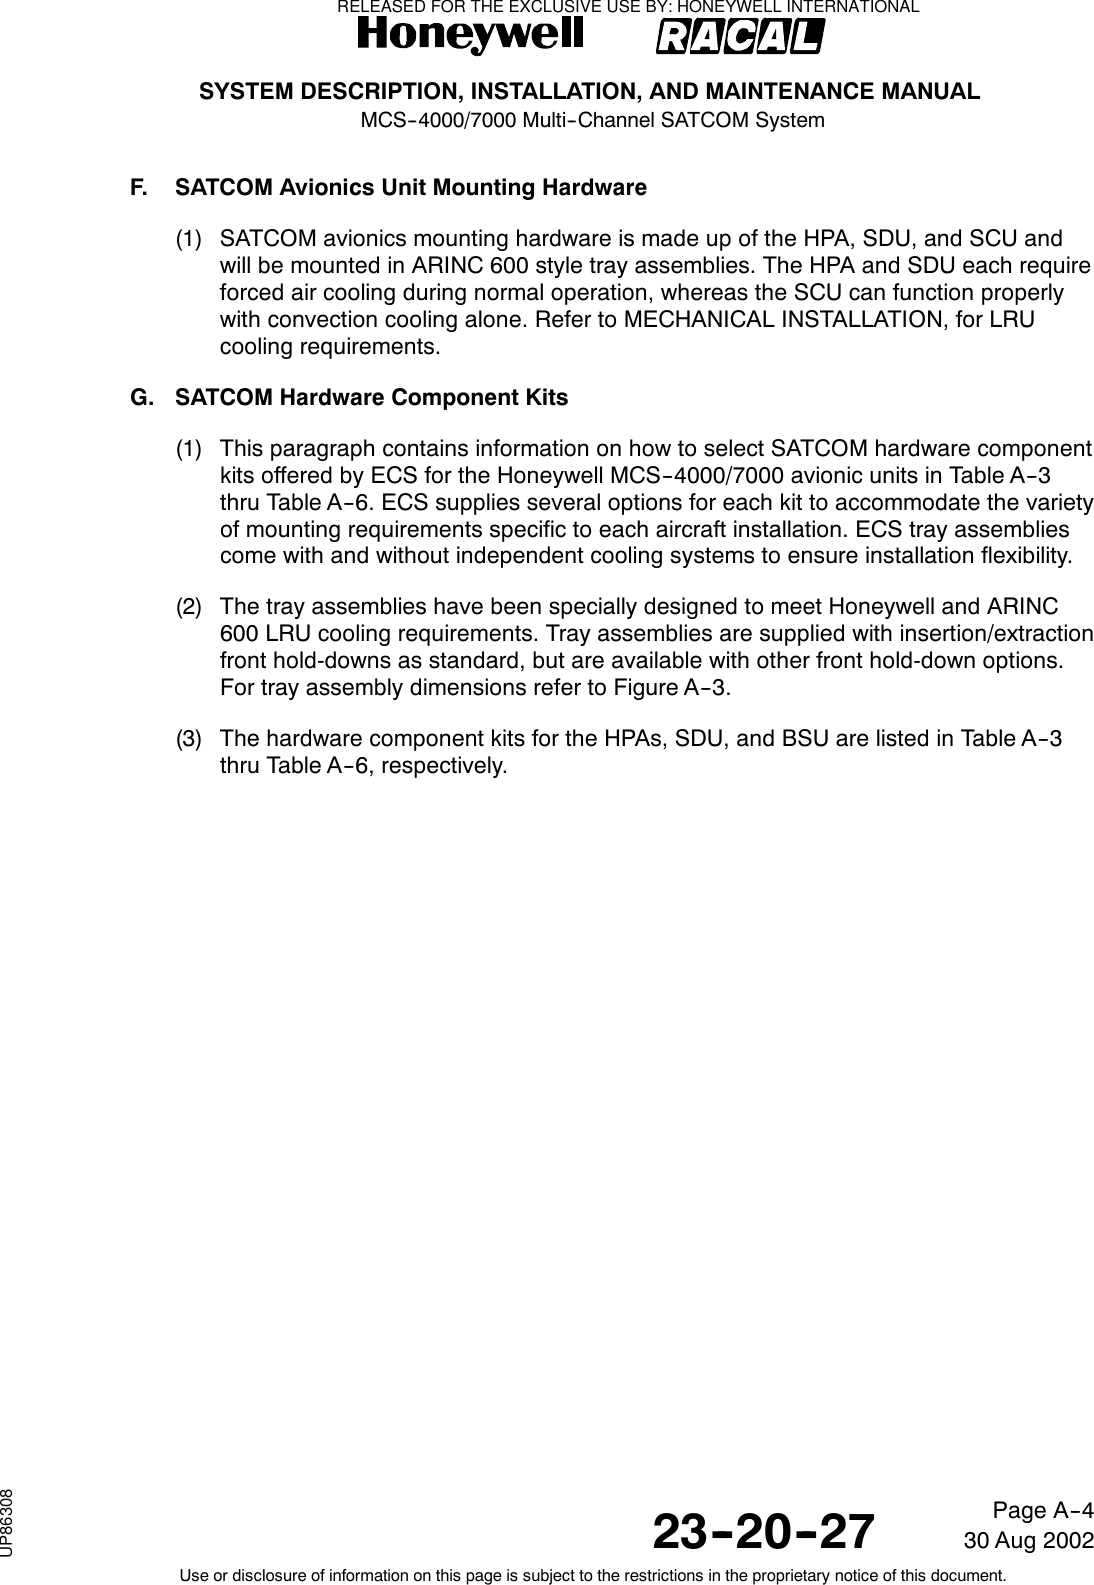 SYSTEM DESCRIPTION, INSTALLATION, AND MAINTENANCE MANUALMCS--4000/7000 Multi--Channel SATCOM System23--20--2730 Aug 2002Use or disclosure of information on this page is subject to the restrictions in the proprietary notice of this document.Page A--4F. SATCOM Avionics Unit Mounting Hardware(1) SATCOM avionics mounting hardware is made up of the HPA, SDU, and SCU andwill be mounted in ARINC 600 style tray assemblies. The HPA and SDU each requireforced air cooling during normal operation, whereas the SCU can function properlywith convection cooling alone. Refer to MECHANICAL INSTALLATION, for LRUcooling requirements.G. SATCOM Hardware Component Kits(1) This paragraph contains information on how to select SATCOM hardware componentkits offered by ECS for the Honeywell MCS--4000/7000 avionic units in Table A--3thru Table A--6. ECS supplies several options for each kit to accommodate the varietyof mounting requirements specific to each aircraft installation. ECS tray assembliescome with and without independent cooling systems to ensure installation flexibility.(2) The tray assemblies have been specially designed to meet Honeywell and ARINC600 LRU cooling requirements. Tray assemblies are supplied with insertion/extractionfront hold-downs as standard, but are available with other front hold-down options.For tray assembly dimensions refer to Figure A--3.(3) The hardware component kits for the HPAs, SDU, and BSU are listed in Table A--3thru Table A--6, respectively.RELEASED FOR THE EXCLUSIVE USE BY: HONEYWELL INTERNATIONALUP86308